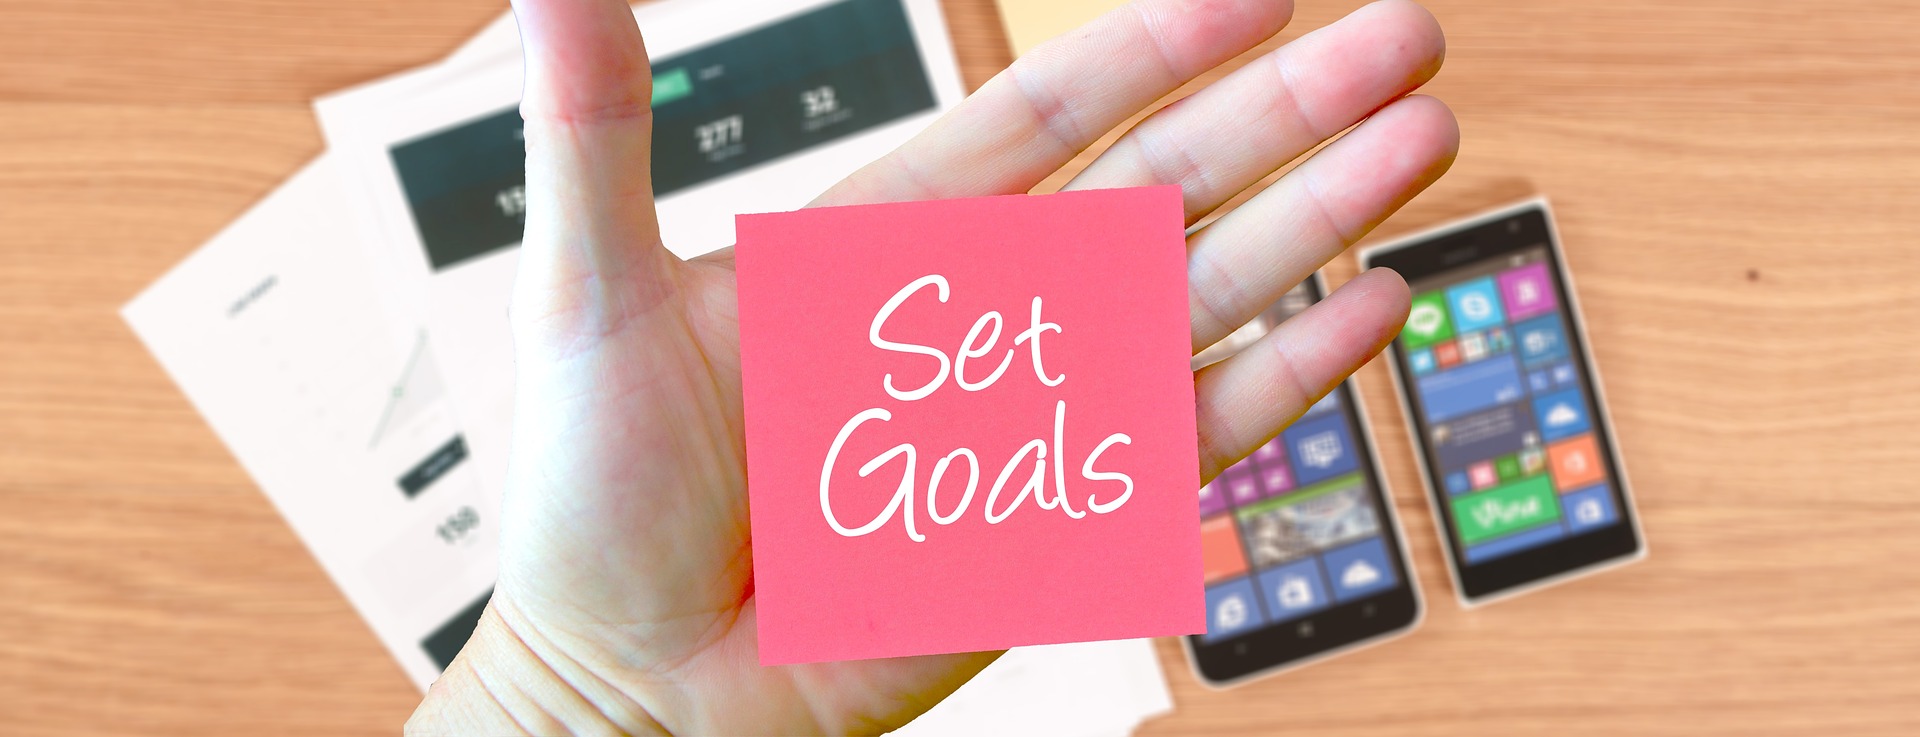 hand with post it note saying Set Goals